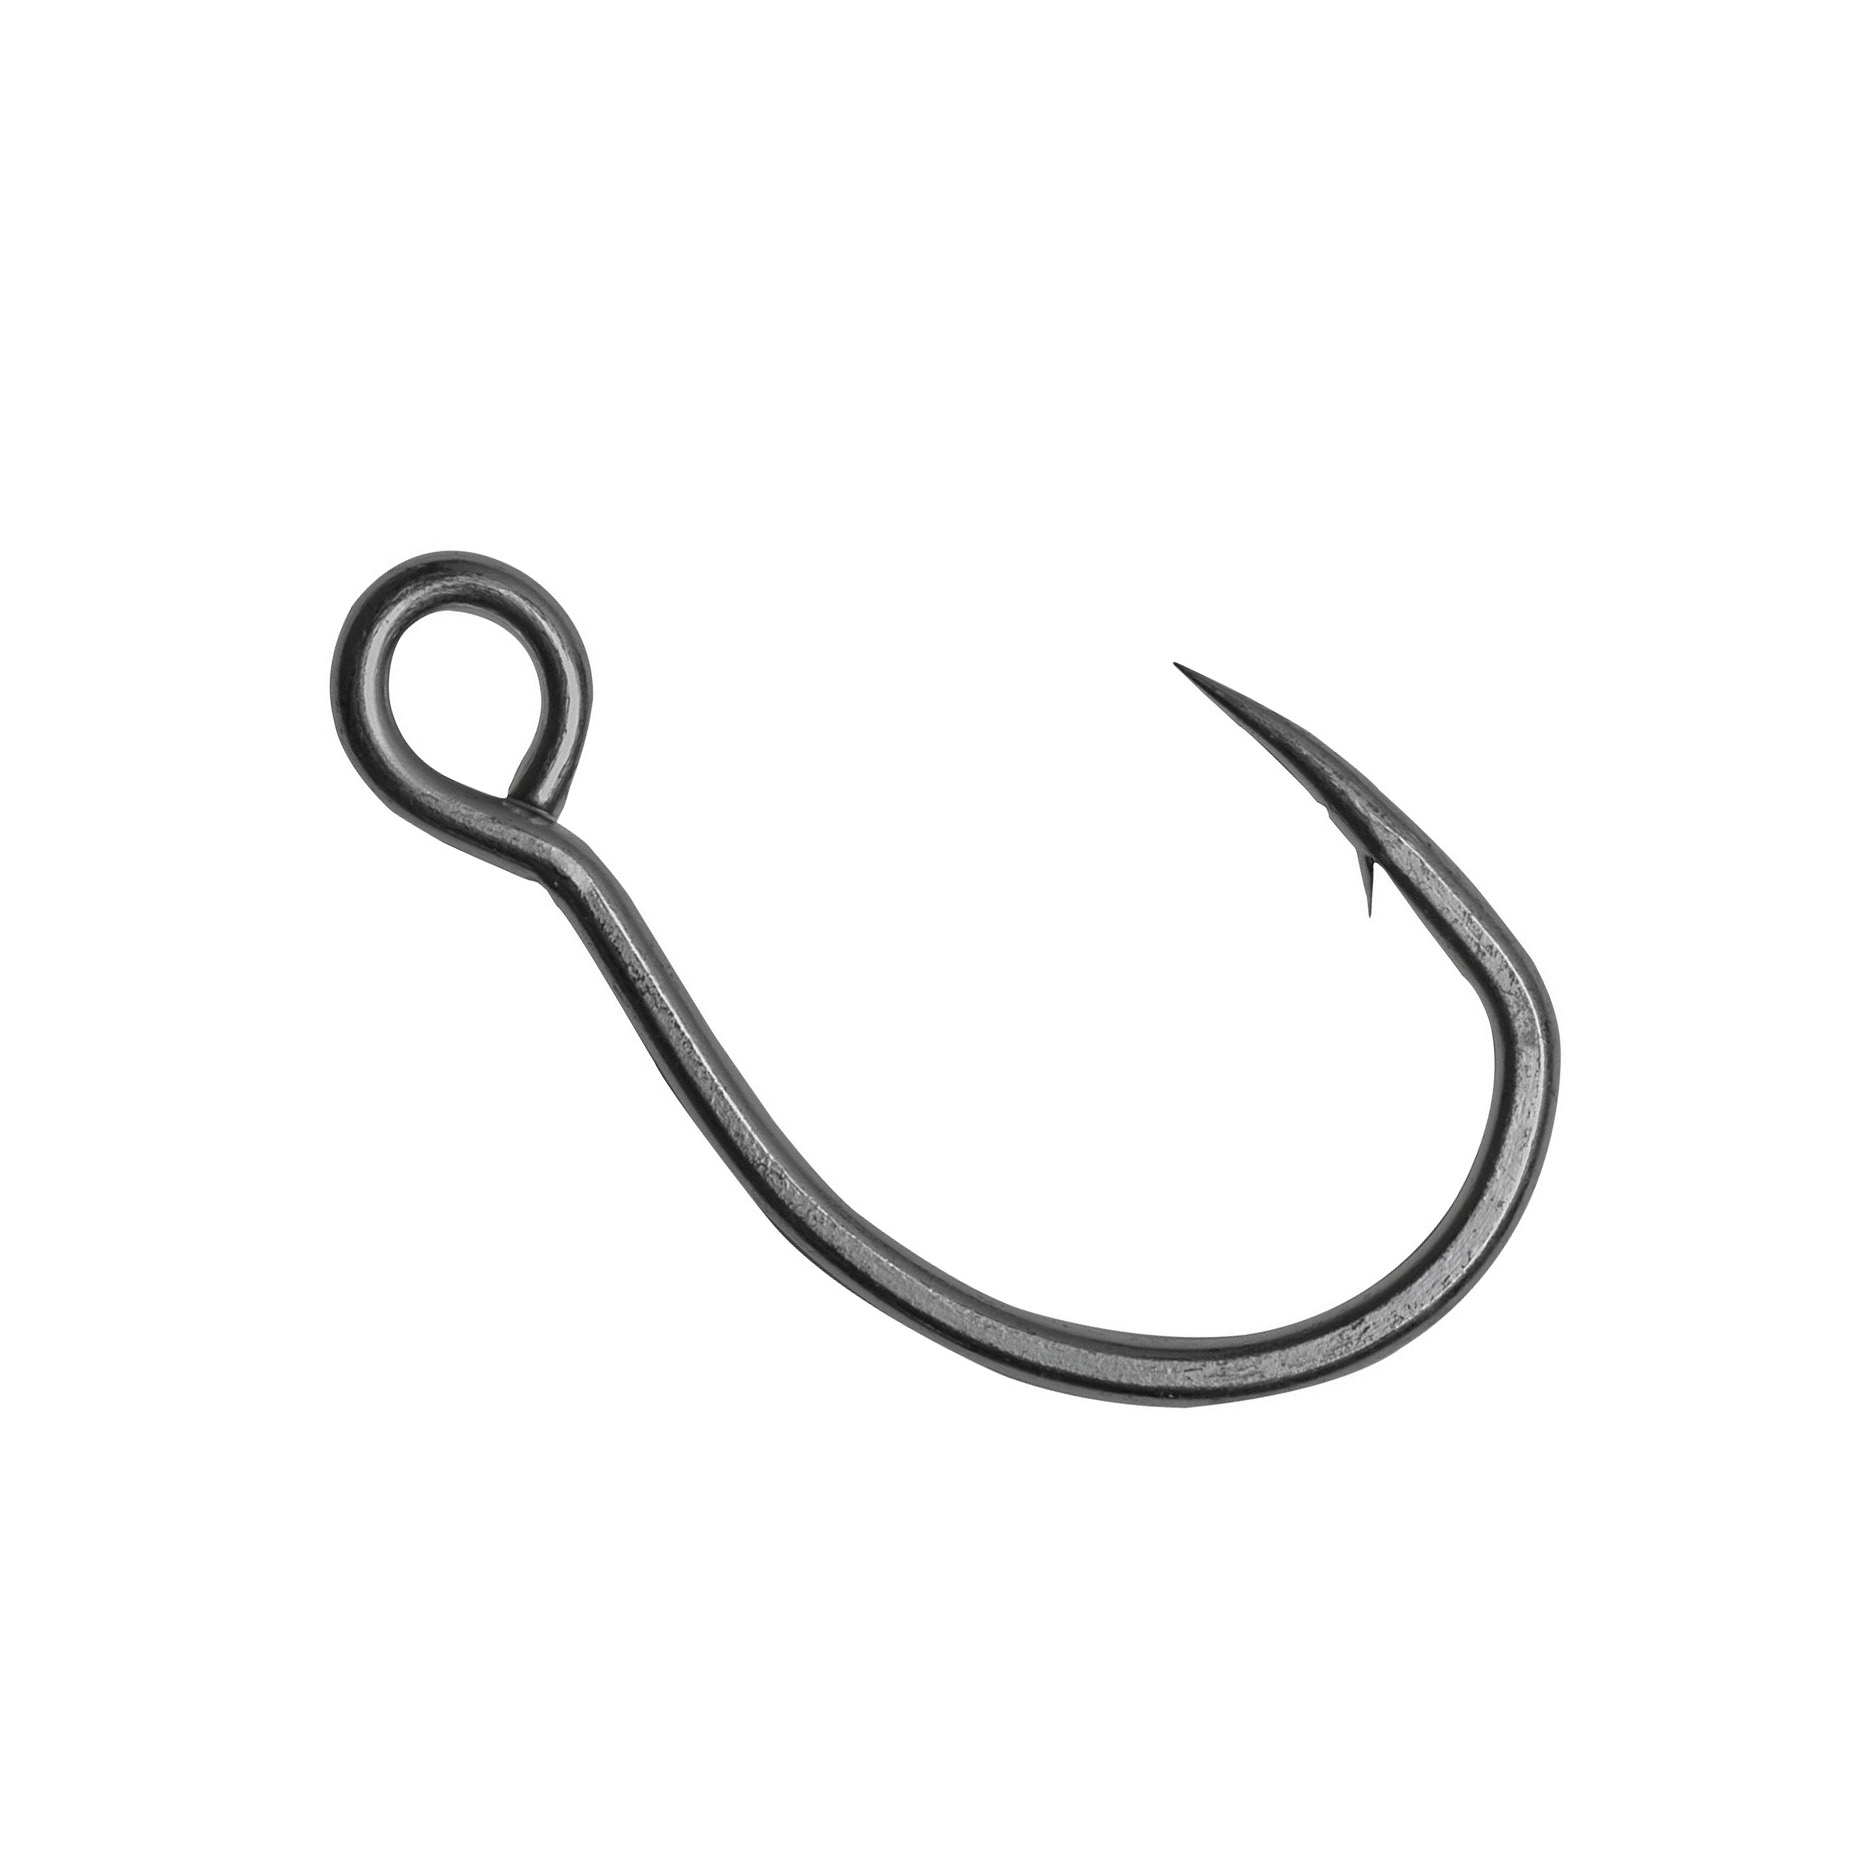 https://www.fishermanswarehouse.com/mfiles/product/image/owner_4102_single_replacement_hooks_xxx_strong.601af698ba1b3.jpg